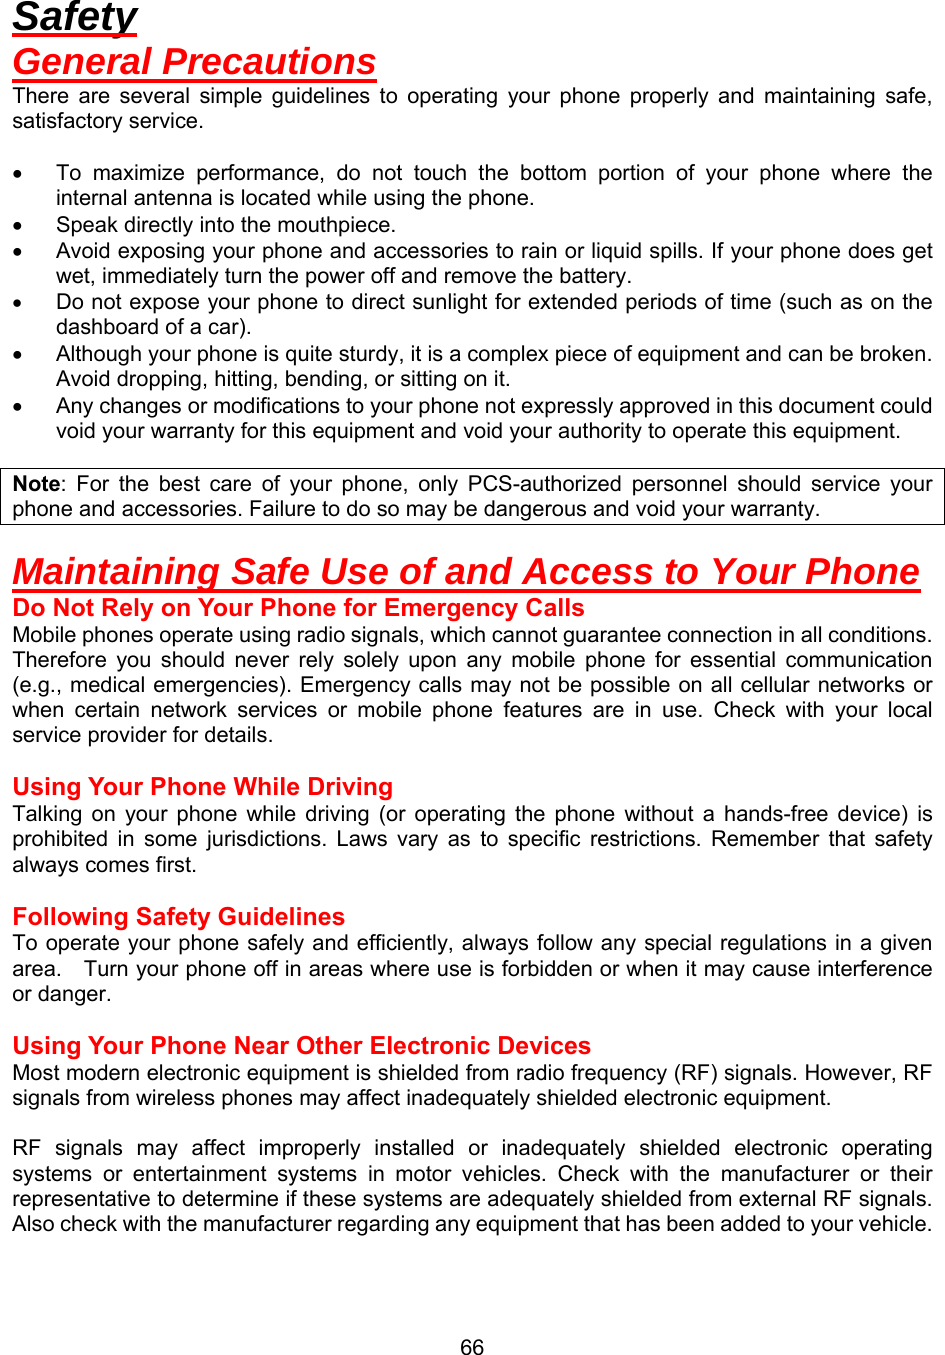  66Safety General Precautions There are several simple guidelines to operating your phone properly and maintaining safe, satisfactory service.  •  To maximize performance, do not touch the bottom portion of your phone where the internal antenna is located while using the phone. •  Speak directly into the mouthpiece. •  Avoid exposing your phone and accessories to rain or liquid spills. If your phone does get wet, immediately turn the power off and remove the battery. •  Do not expose your phone to direct sunlight for extended periods of time (such as on the dashboard of a car). •  Although your phone is quite sturdy, it is a complex piece of equipment and can be broken. Avoid dropping, hitting, bending, or sitting on it. •  Any changes or modifications to your phone not expressly approved in this document could void your warranty for this equipment and void your authority to operate this equipment.  Note: For the best care of your phone, only PCS-authorized personnel should service your phone and accessories. Failure to do so may be dangerous and void your warranty.  Maintaining Safe Use of and Access to Your Phone Do Not Rely on Your Phone for Emergency Calls Mobile phones operate using radio signals, which cannot guarantee connection in all conditions.   Therefore you should never rely solely upon any mobile phone for essential communication (e.g., medical emergencies). Emergency calls may not be possible on all cellular networks or when certain network services or mobile phone features are in use. Check with your local service provider for details.  Using Your Phone While Driving Talking on your phone while driving (or operating the phone without a hands-free device) is prohibited in some jurisdictions. Laws vary as to specific restrictions. Remember that safety always comes first.  Following Safety Guidelines To operate your phone safely and efficiently, always follow any special regulations in a given area.    Turn your phone off in areas where use is forbidden or when it may cause interference or danger.  Using Your Phone Near Other Electronic Devices Most modern electronic equipment is shielded from radio frequency (RF) signals. However, RF signals from wireless phones may affect inadequately shielded electronic equipment.    RF signals may affect improperly installed or inadequately shielded electronic operating systems or entertainment systems in motor vehicles. Check with the manufacturer or their representative to determine if these systems are adequately shielded from external RF signals. Also check with the manufacturer regarding any equipment that has been added to your vehicle.   